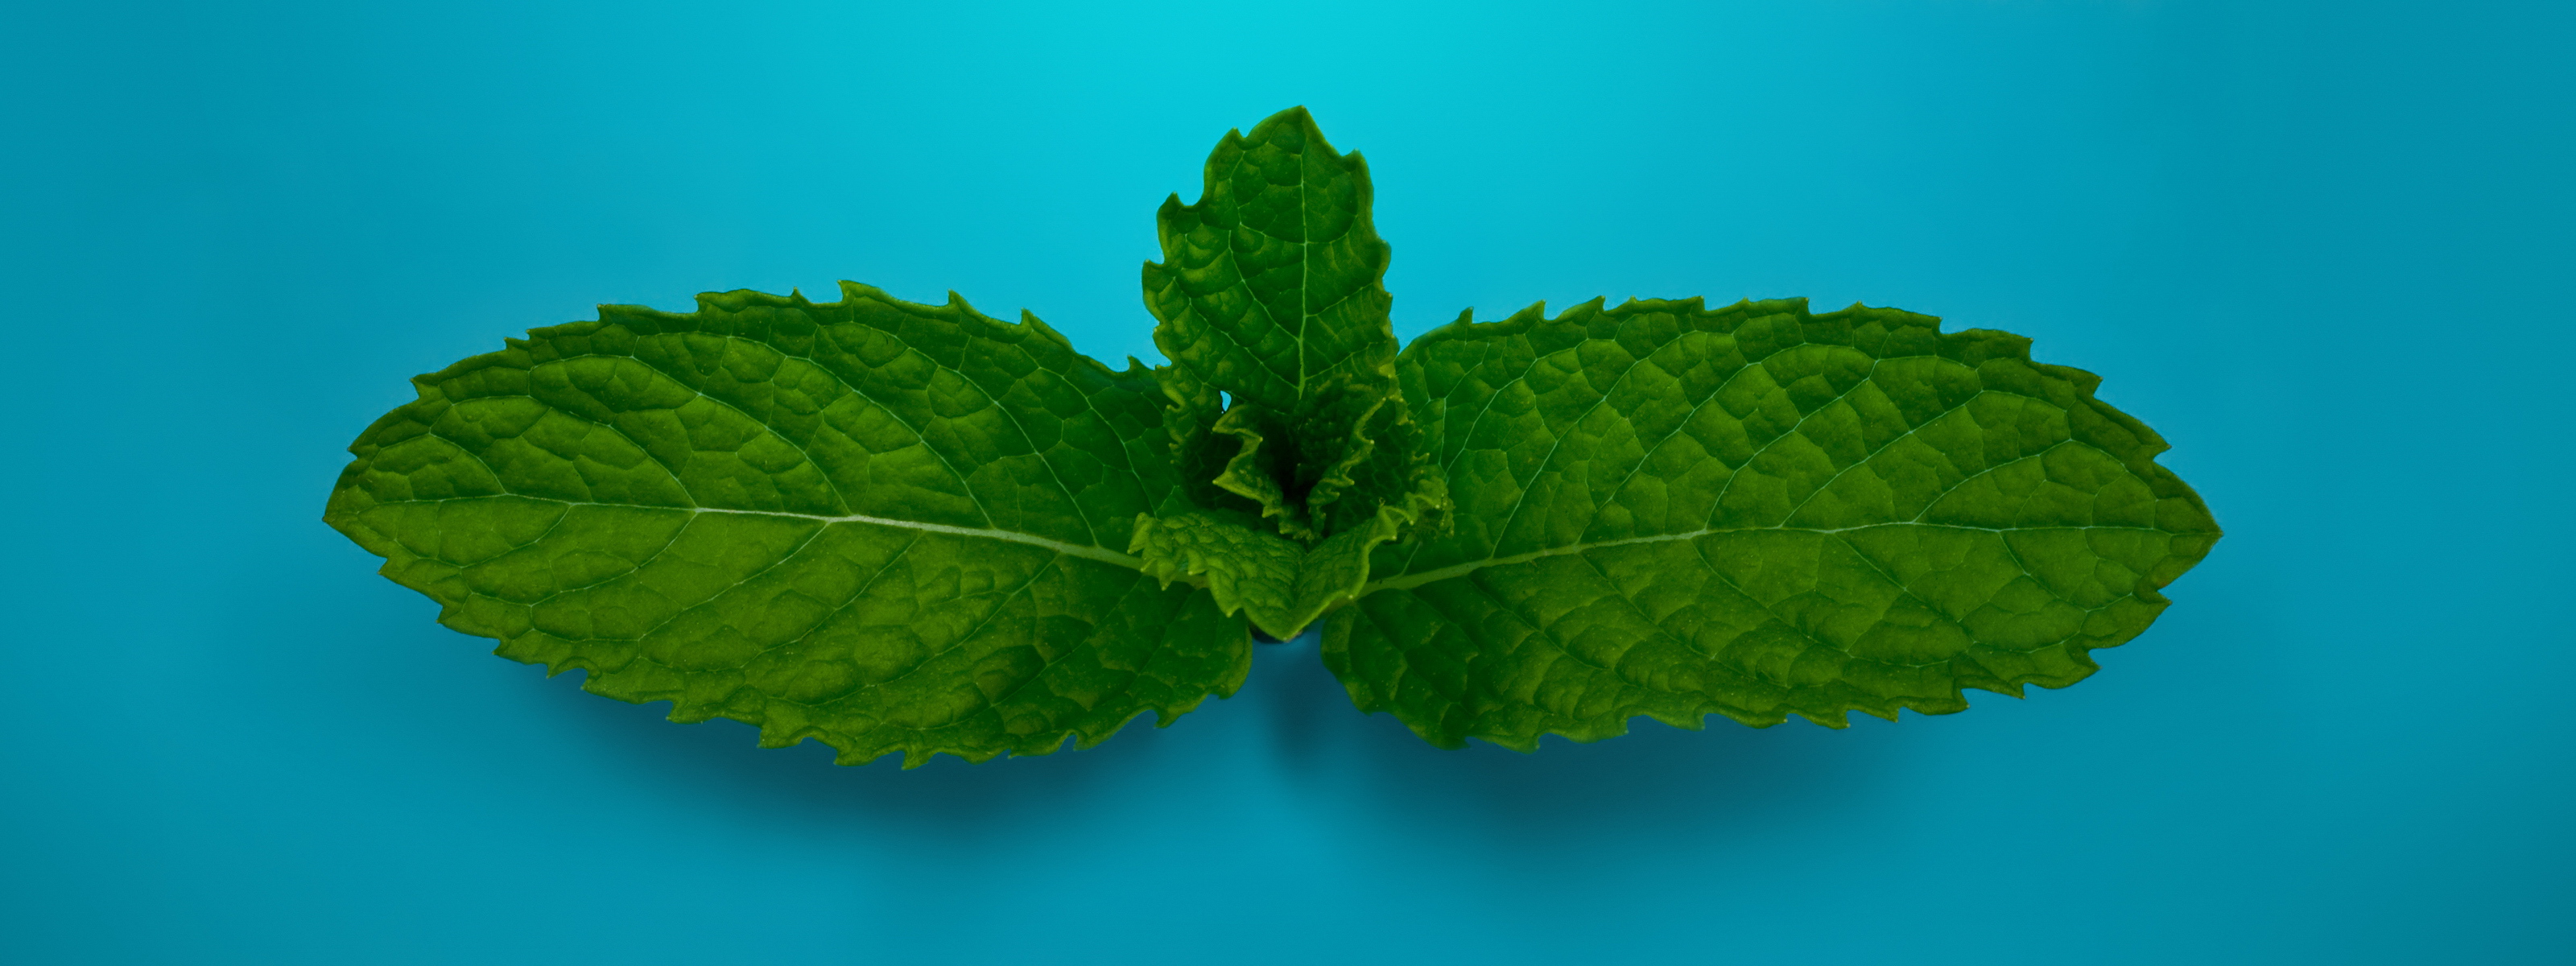 General 3200x1200 leaves blue background mint leaves